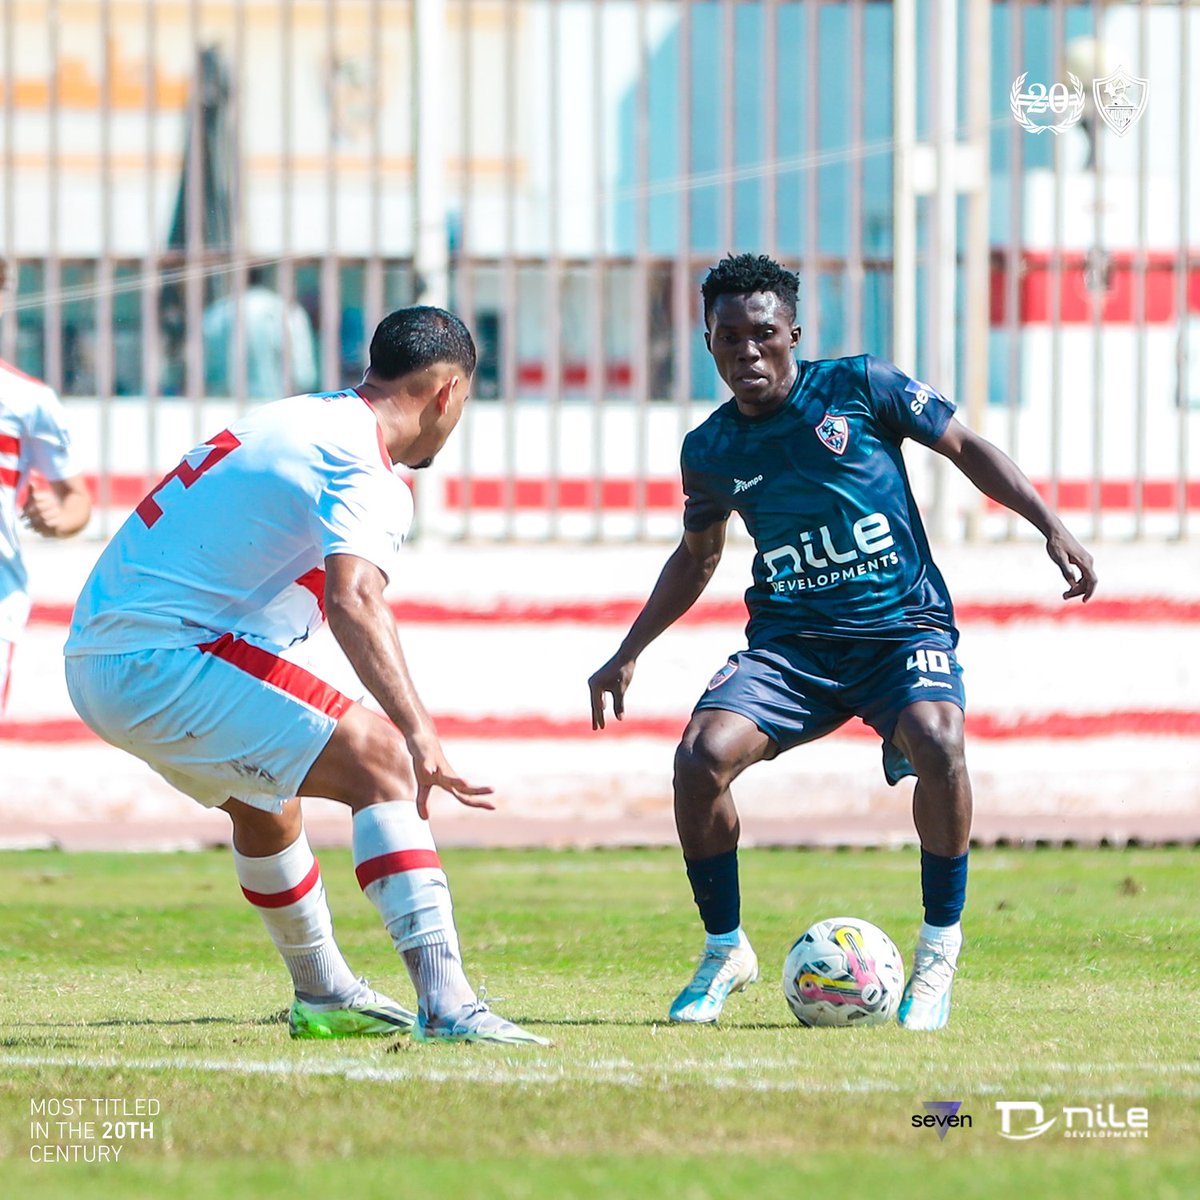 Travis Mutyaba 🇺🇬 is part of the Zamalek SC match-day squad that will play against rivals Al Ahly in the highly anticipated Cairo Derby tonight. Kick-off is 8pm.